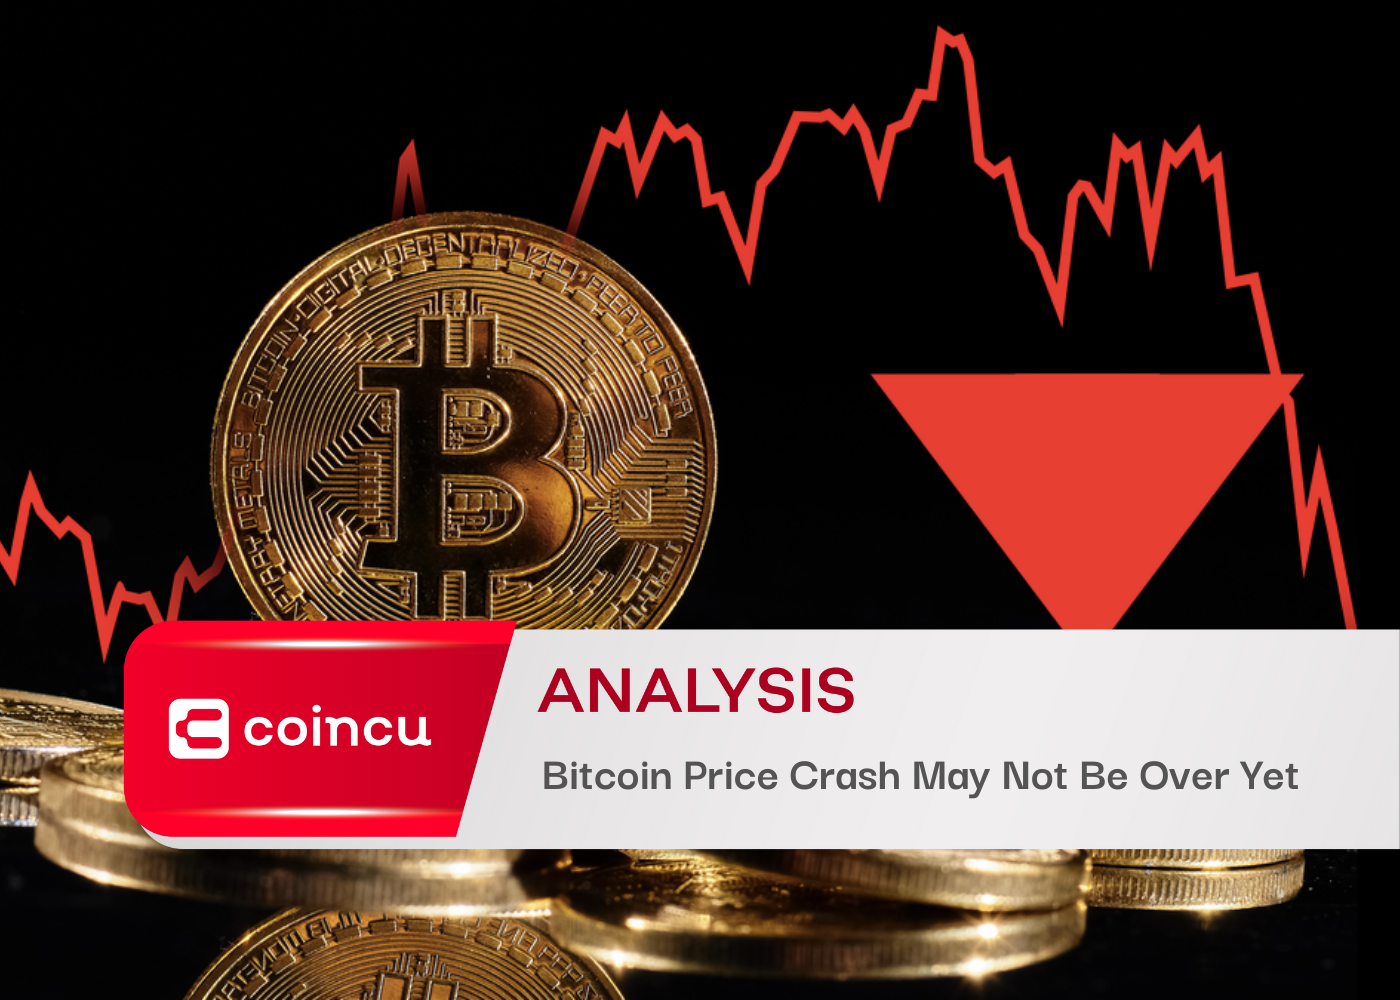 Bitcoin Price Crash May Not Be Over Yet